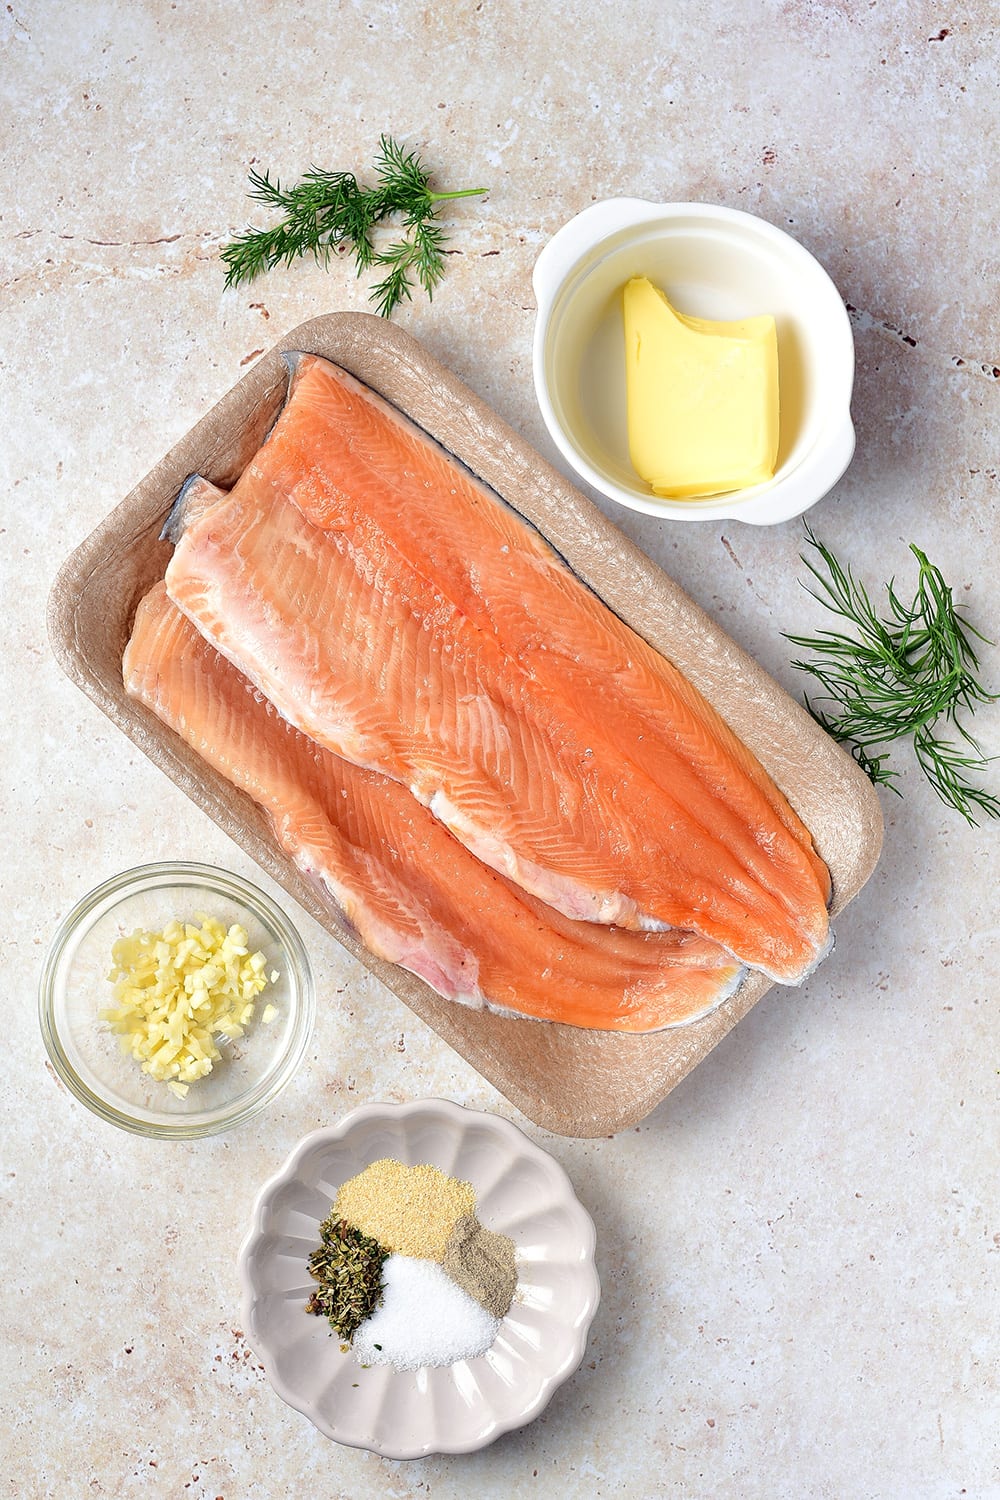 ingredients for baking rainbow trout